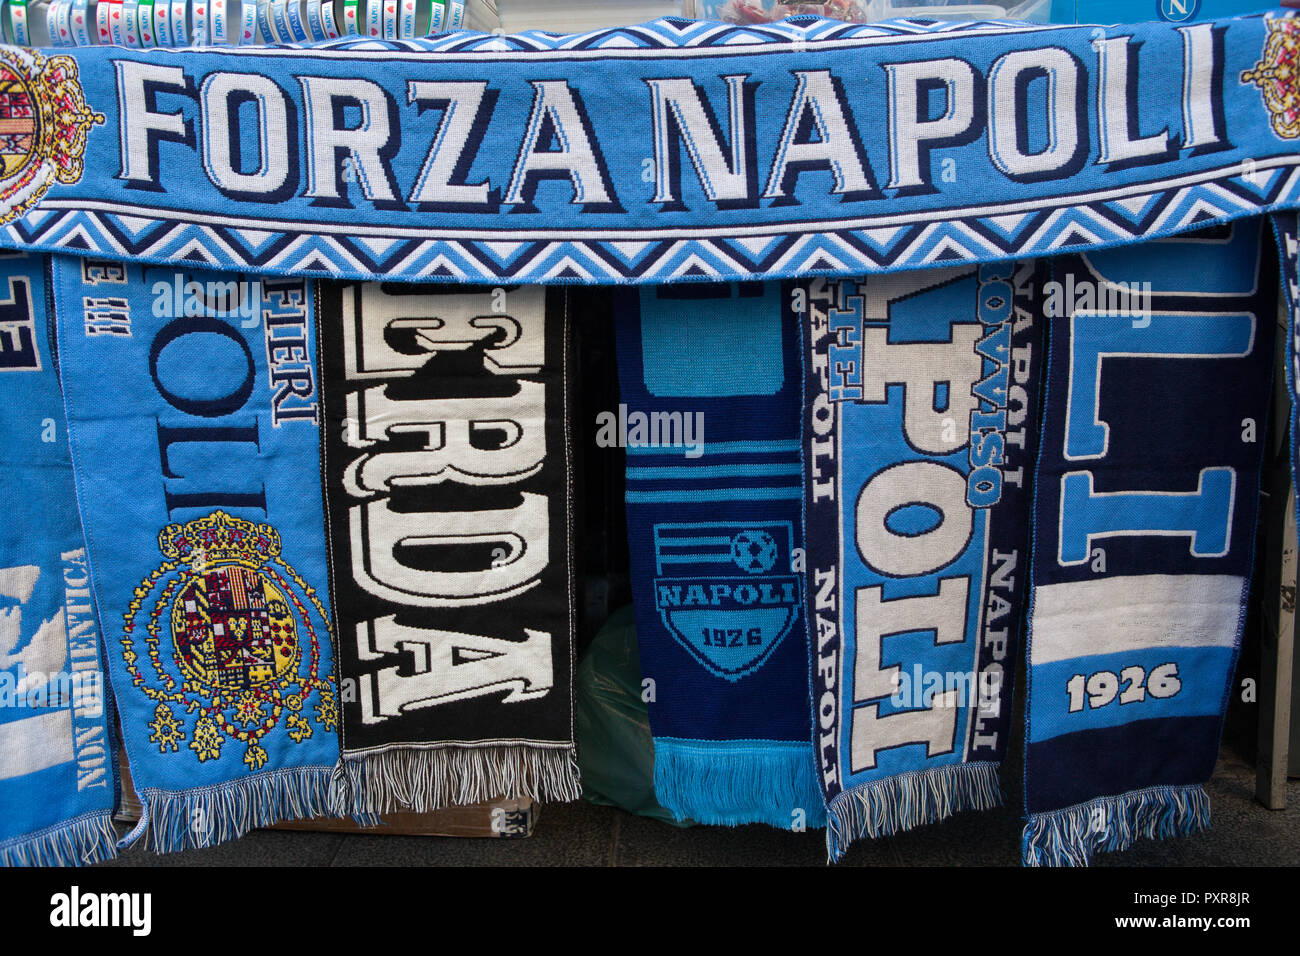 Napoli football club scarves for sale from a stall in Central Naples Stock Photo